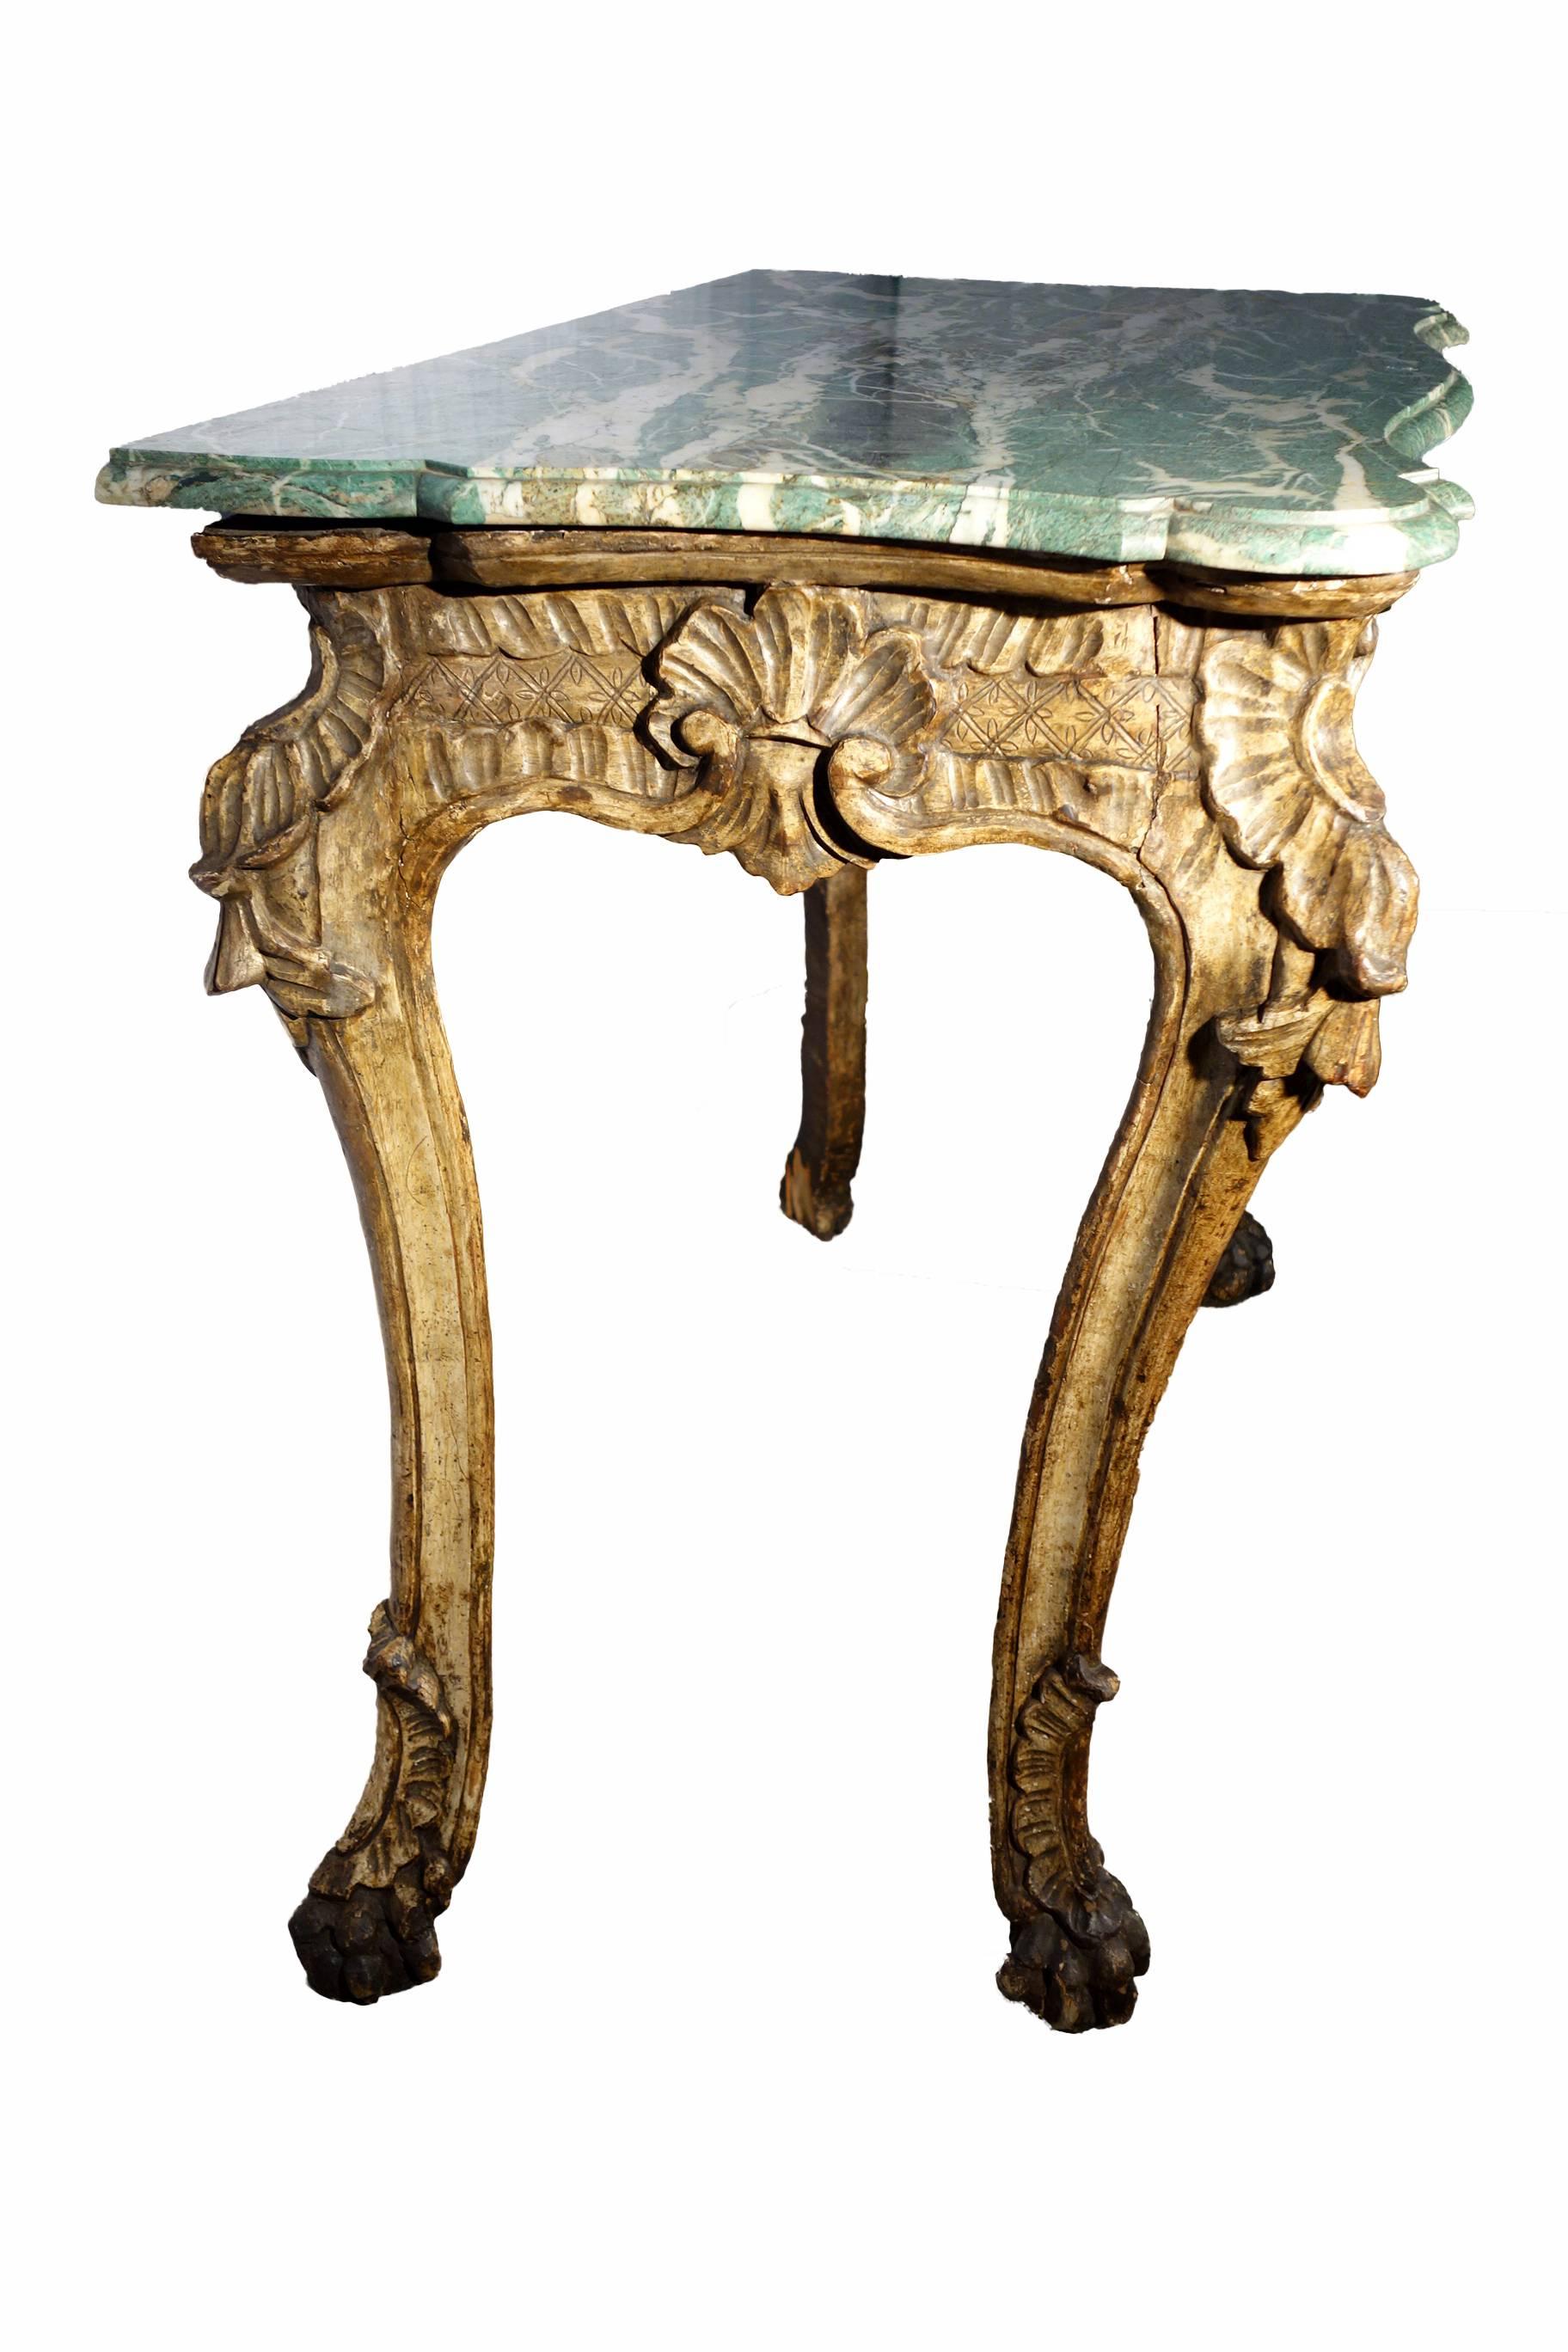 Carved Early 18th Century Italian Roman Console Mecca Gold Silver Leaf and Malachite